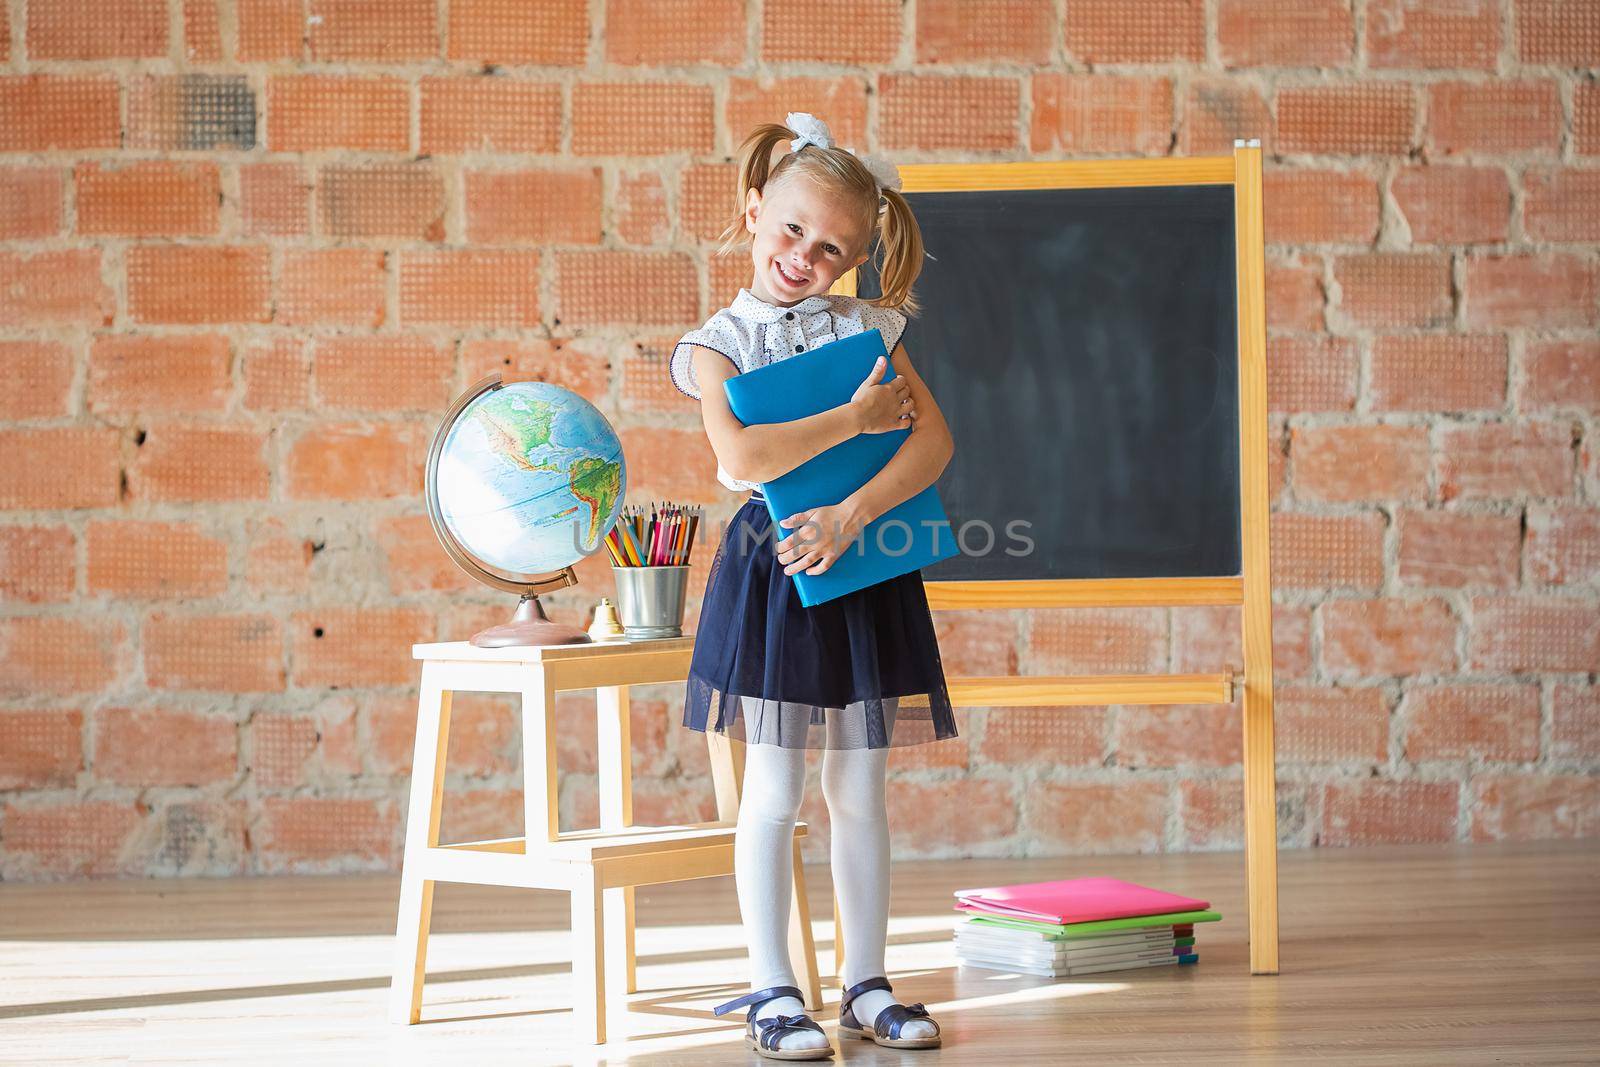 Adorable school girl smiling in front of blackboard with book in her hands by galinasharapova